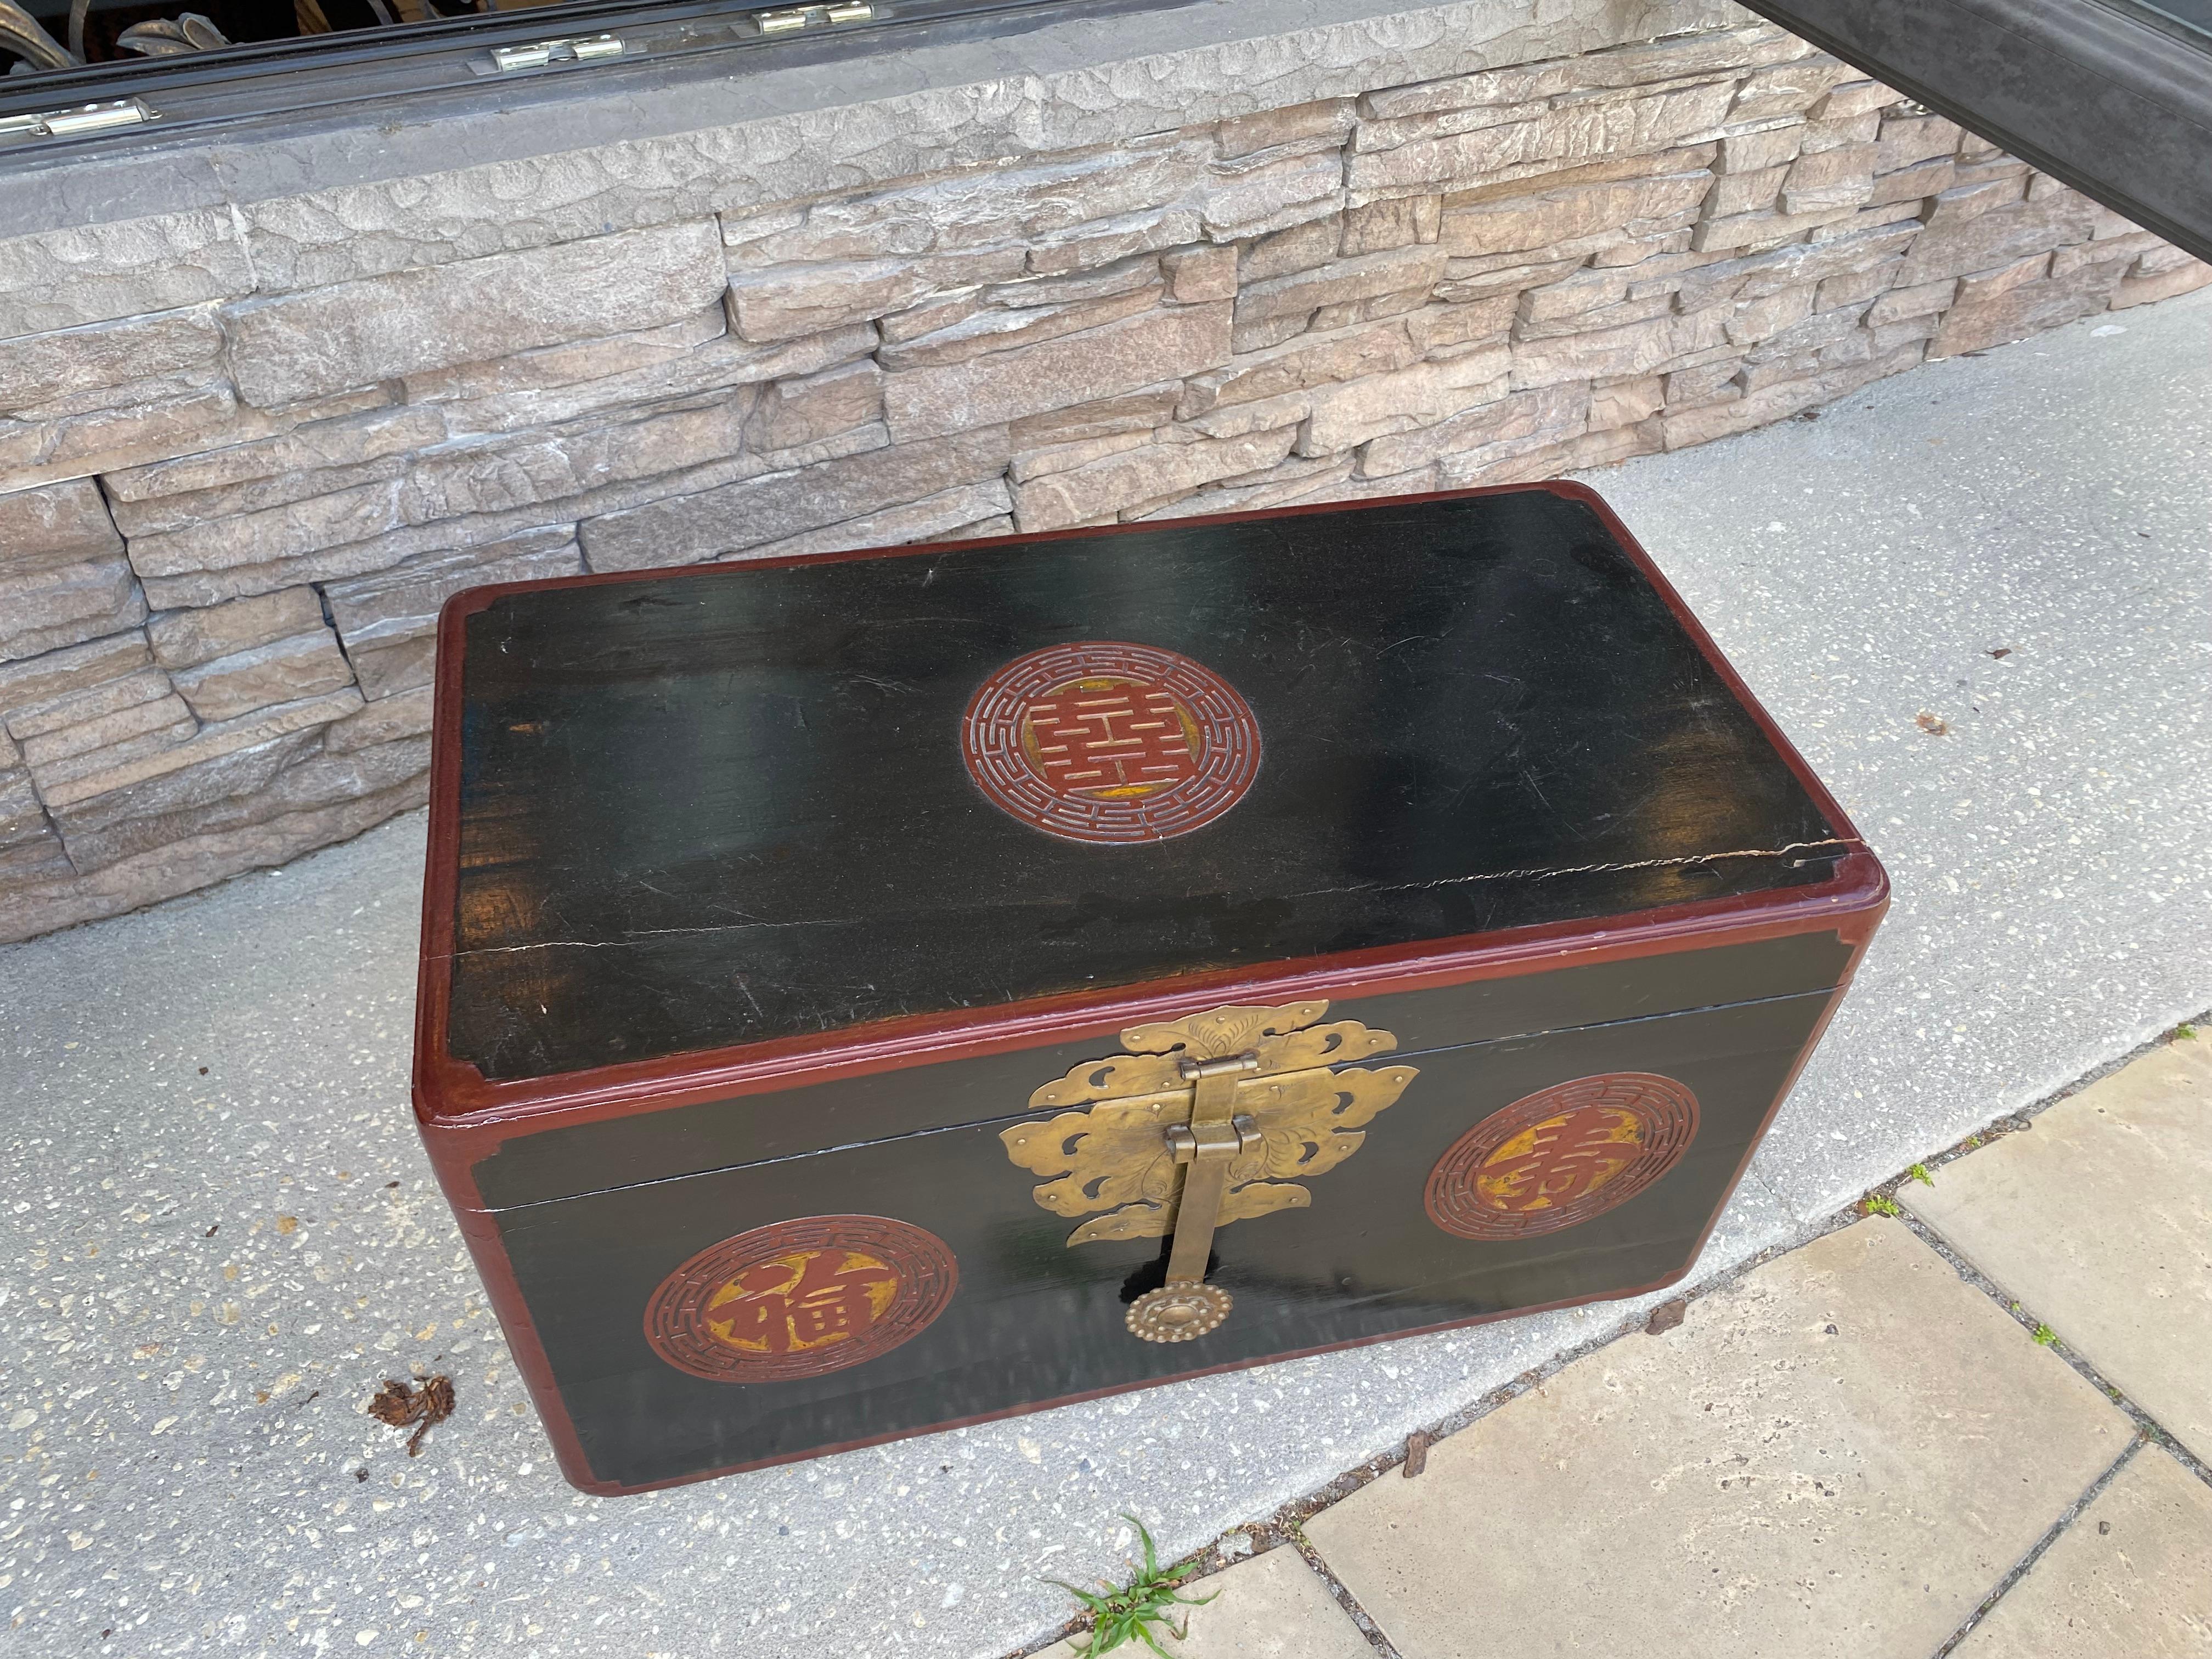 The Chinese hand crafted trunk has a double happiness emblem on the top
Handles to the sides background in black with several red medallions
Wonderful condition.